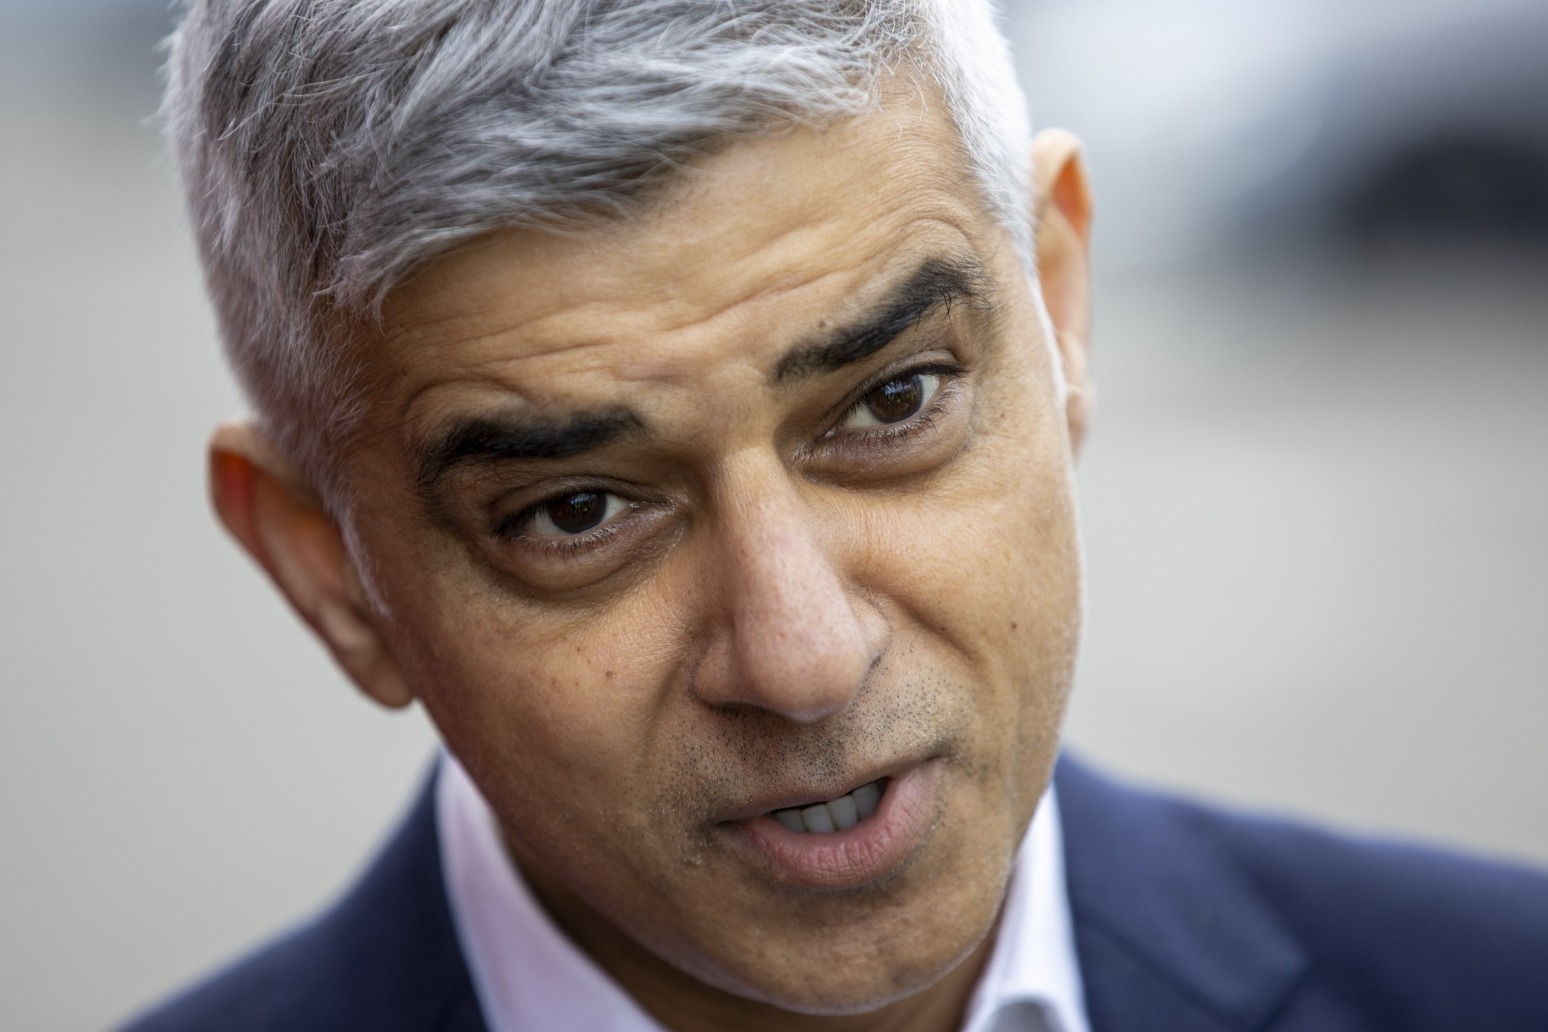 Chelsea must not be sold off as part of ‘fire sale’, warns Sadiq Khan 